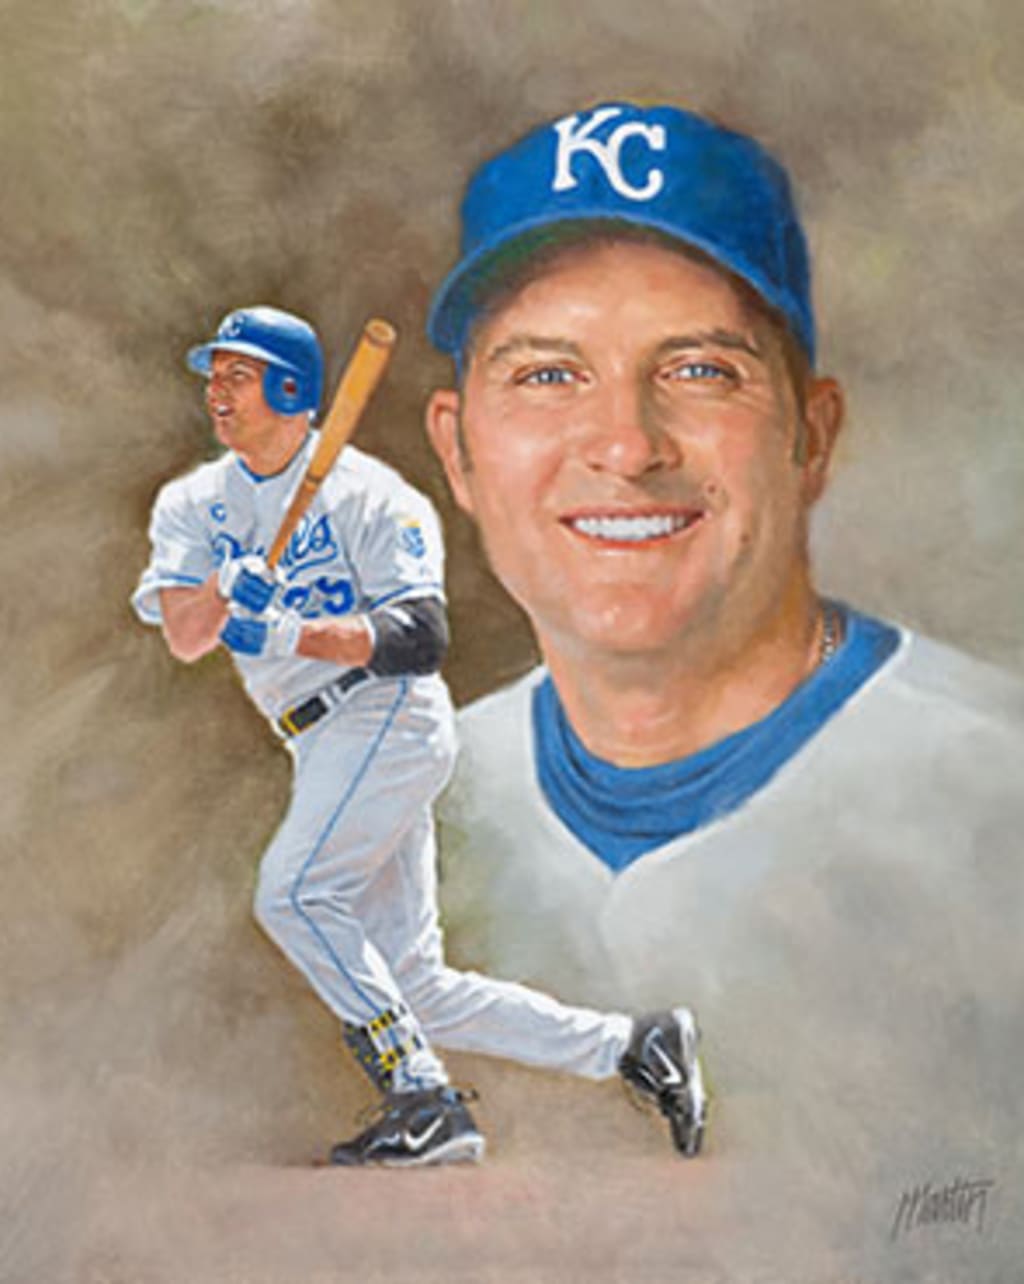 Mike Sweeney listed on BBWAA Hall of Fame ballot - Royals Review